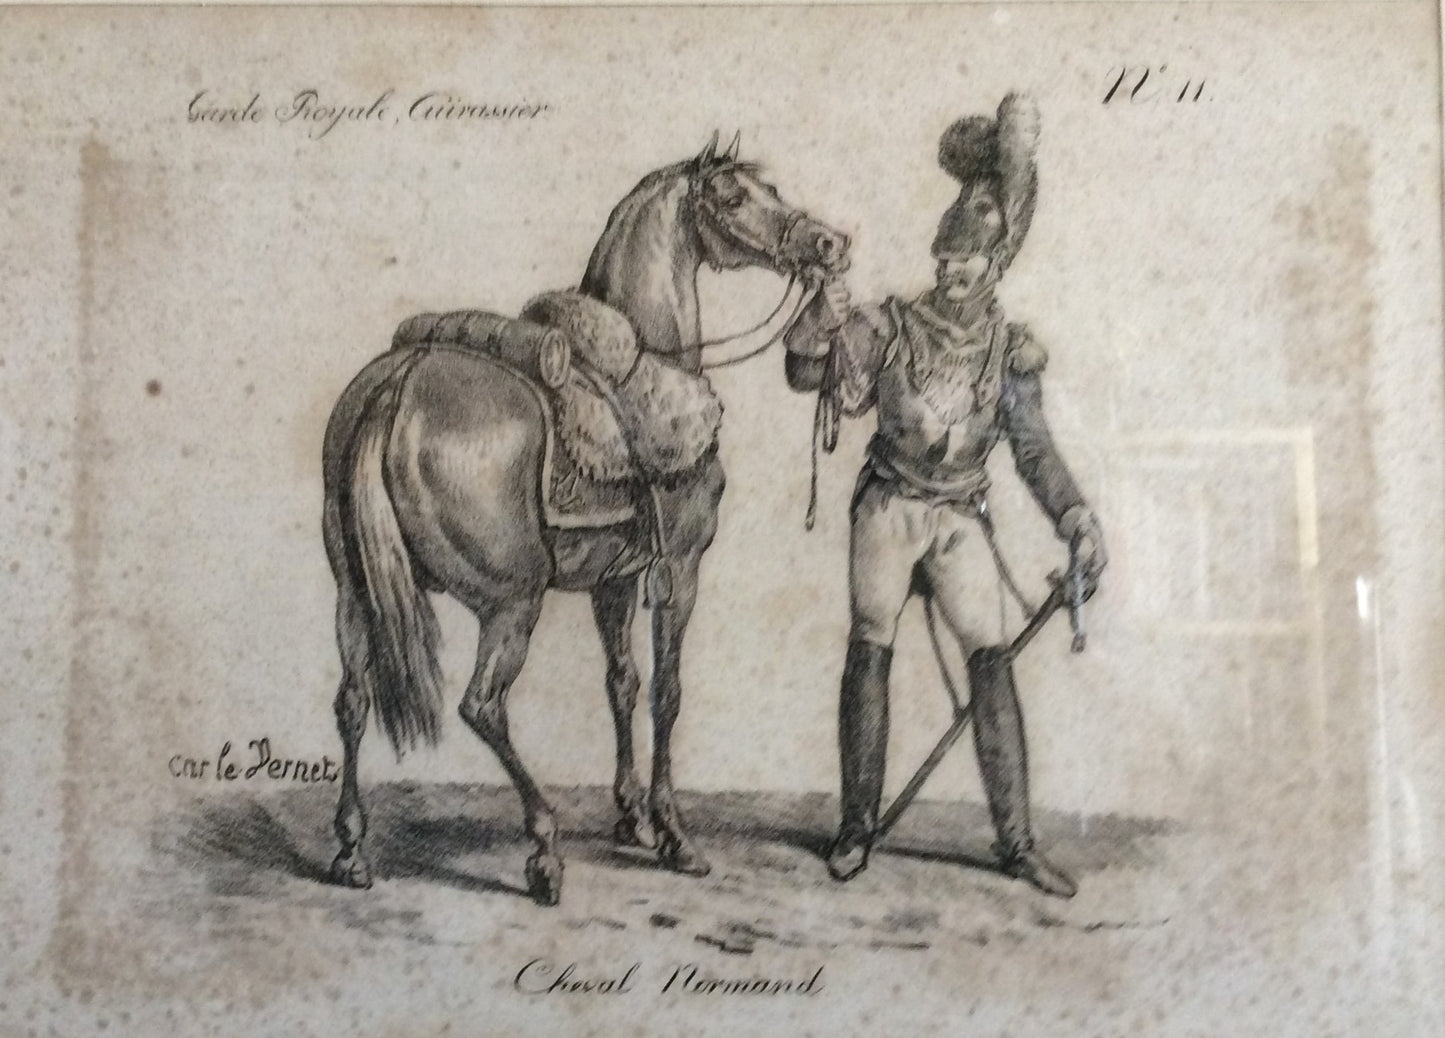 Vernet Garde Royale Cuirassier Cheval Normand